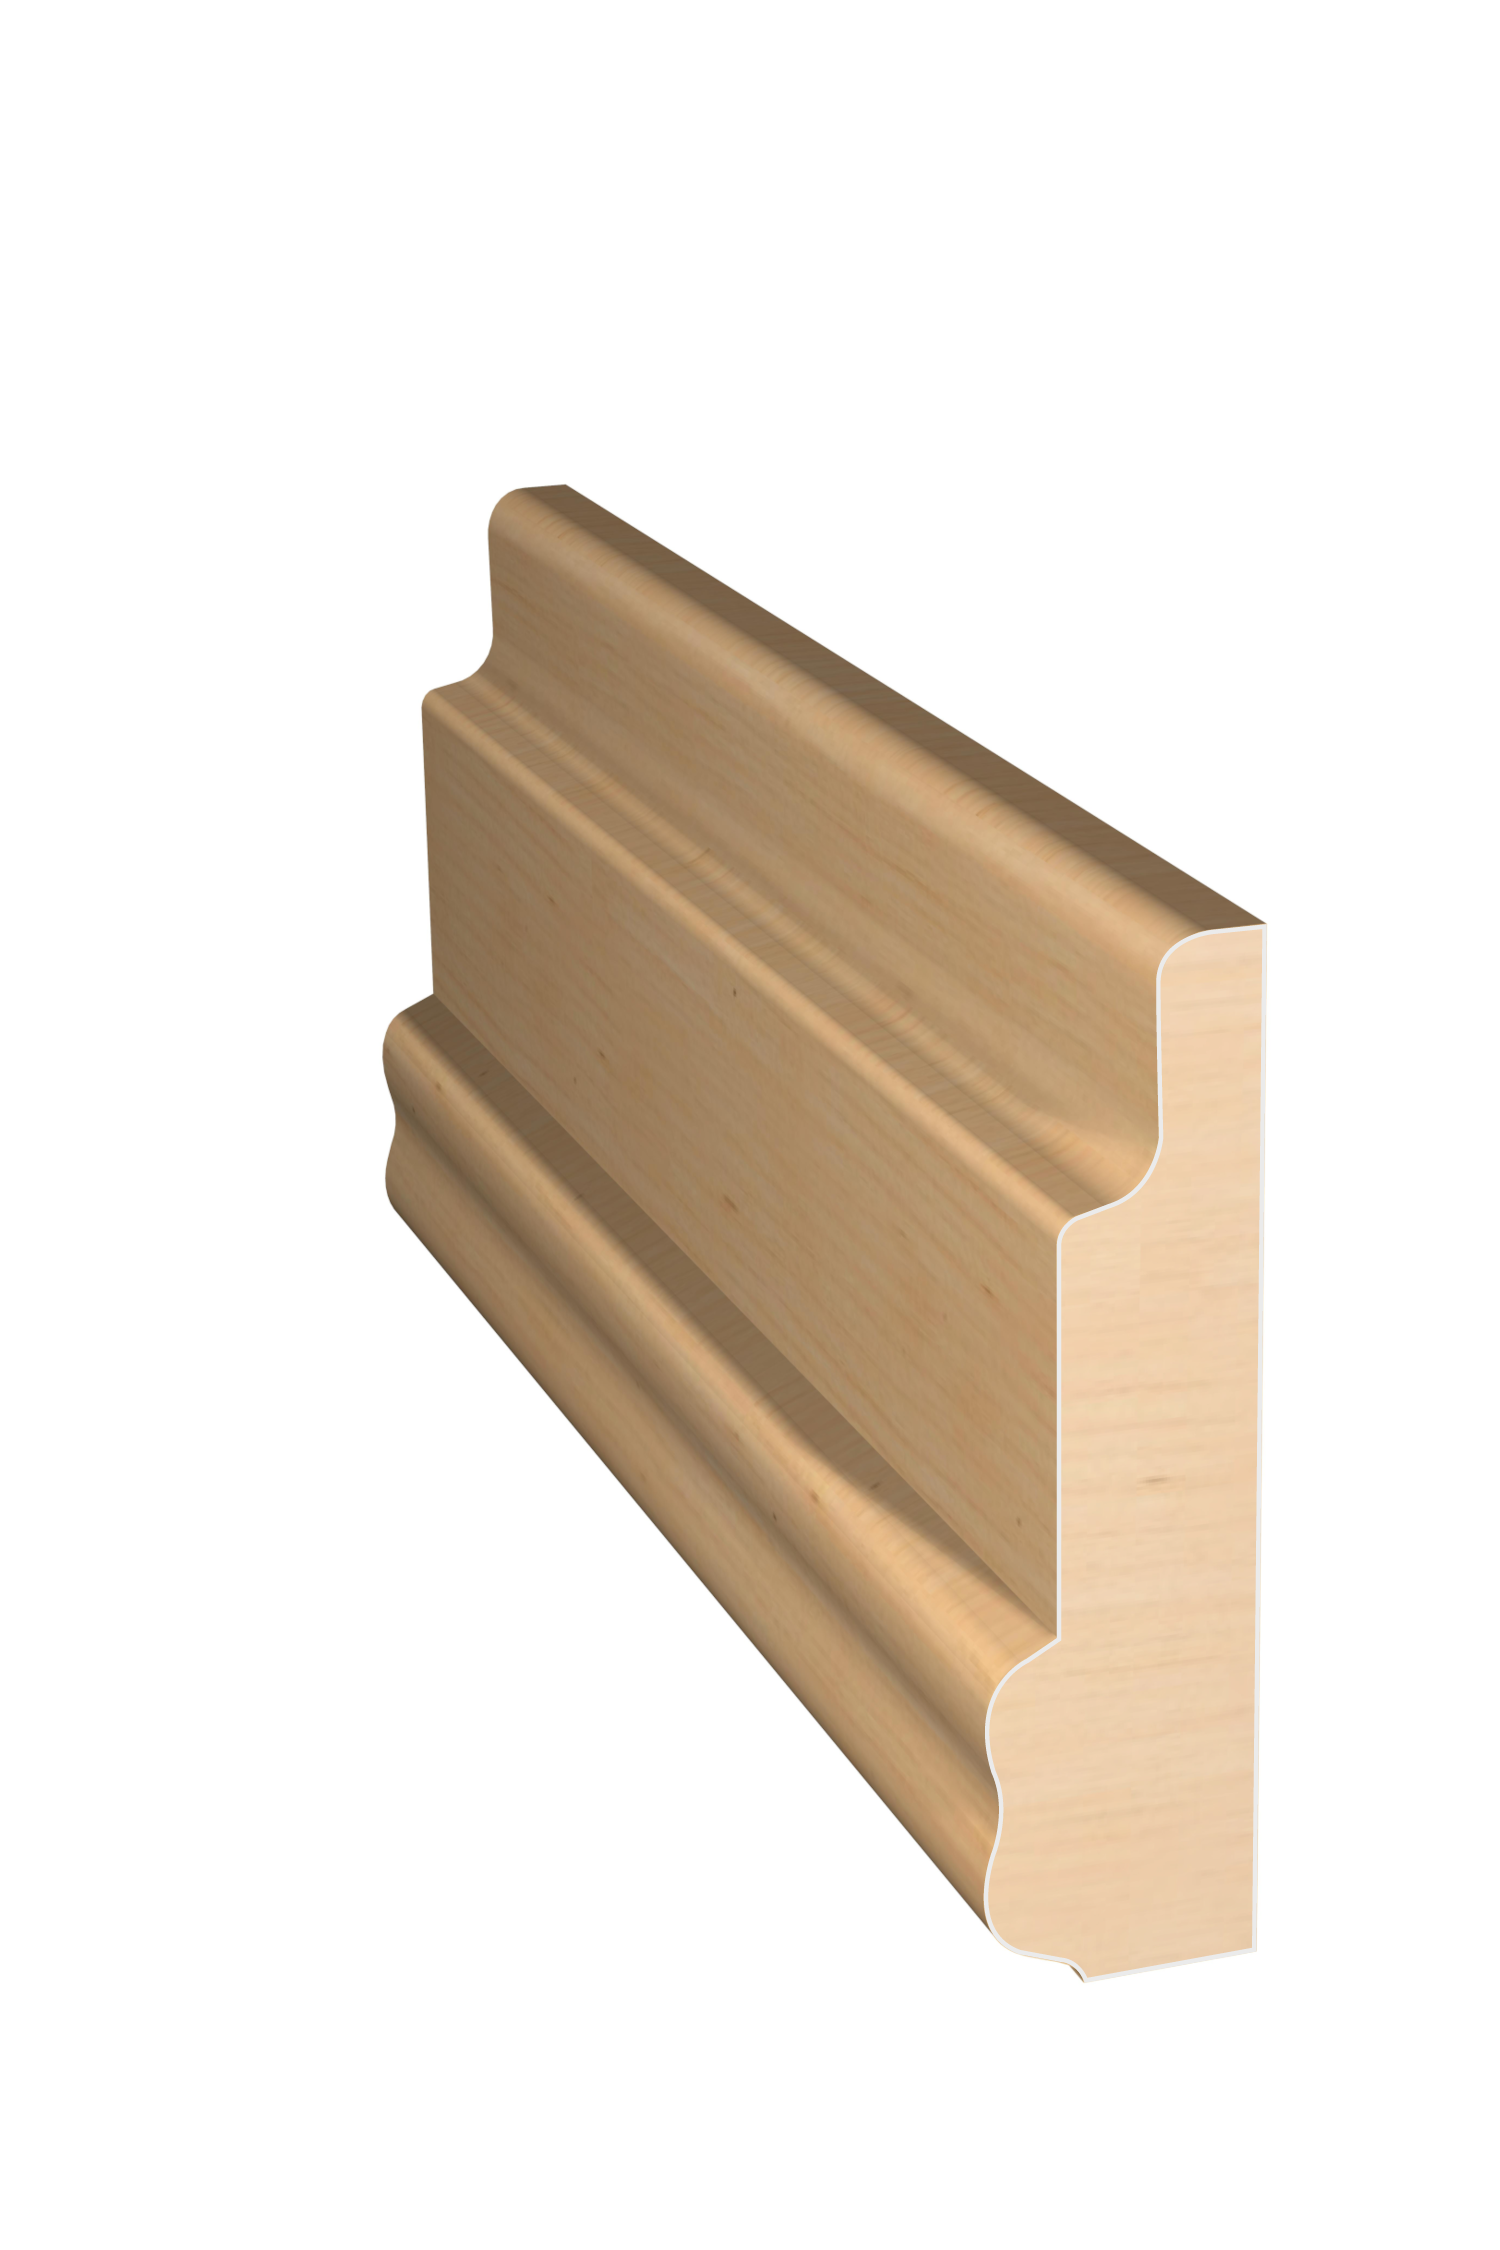 Three dimensional rendering of custom casing wood molding CAPL23413 made by Public Lumber Company in Detroit.